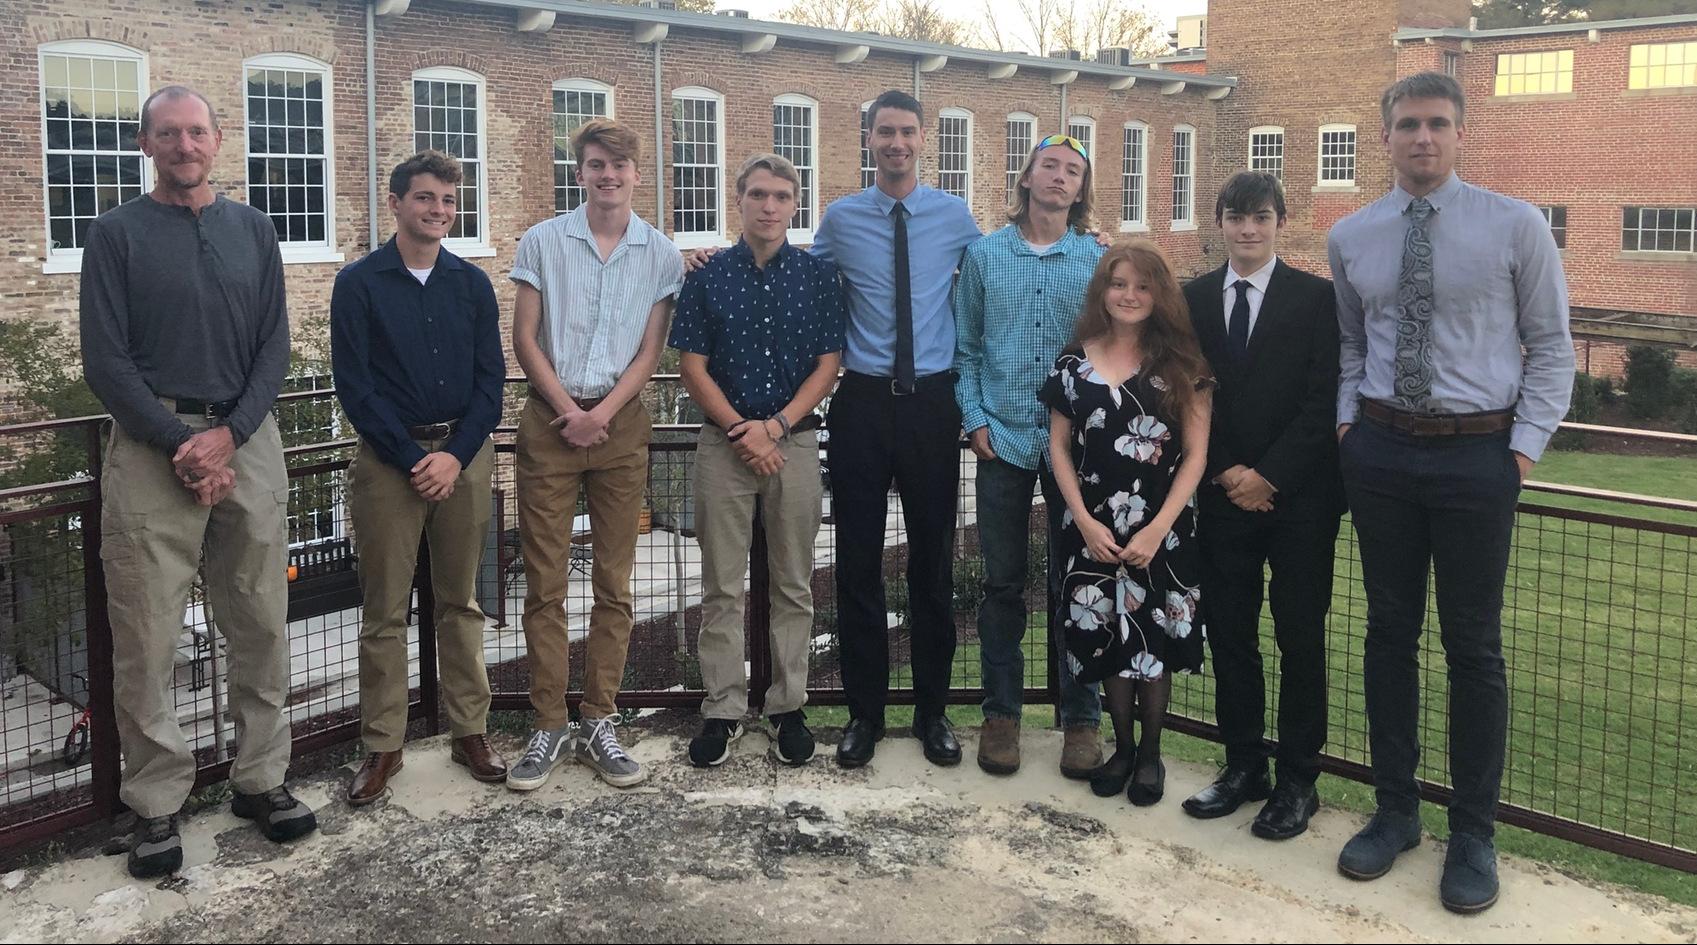 The Brevard College cross country team at the 2019 USA South Cross Country Banquet (Pictured L/R: Volunteer Assistant Coach Chad Newton, Dylan Freeman, Miles Schafer, Solomon Turner, Head Coach Darryll Patrick, Gavin Morgan, Abigail Juul, Michael Fader, & Assistant Coach Jordan Tager)